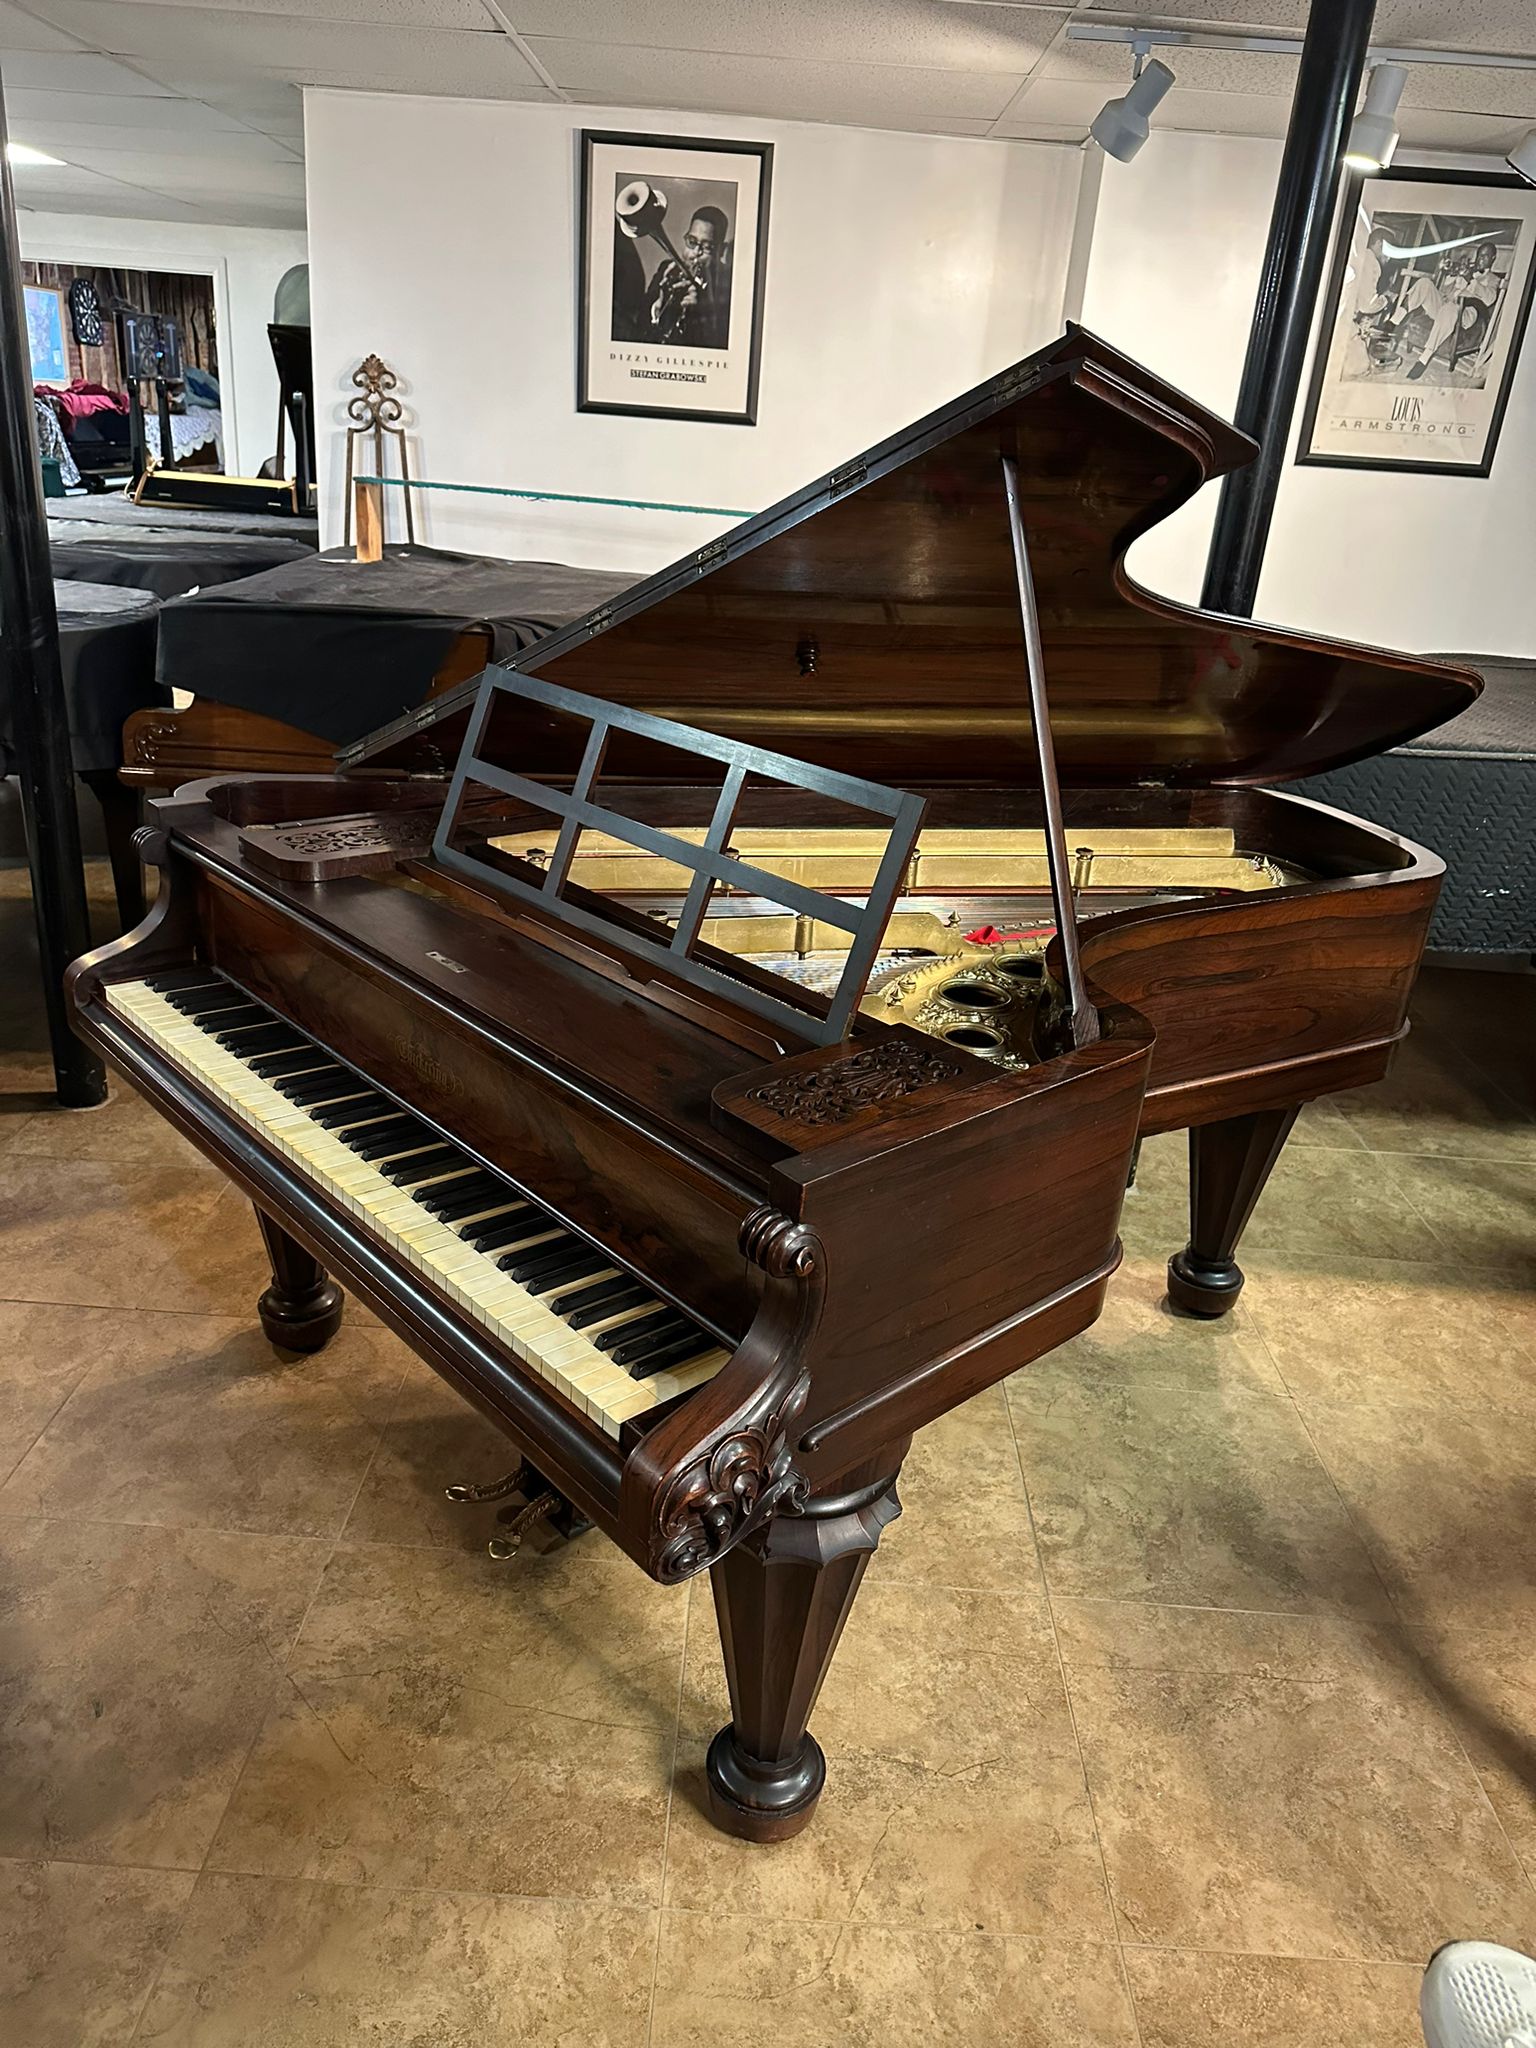 Historical CHICKERING & SONS 5’7” grand piano